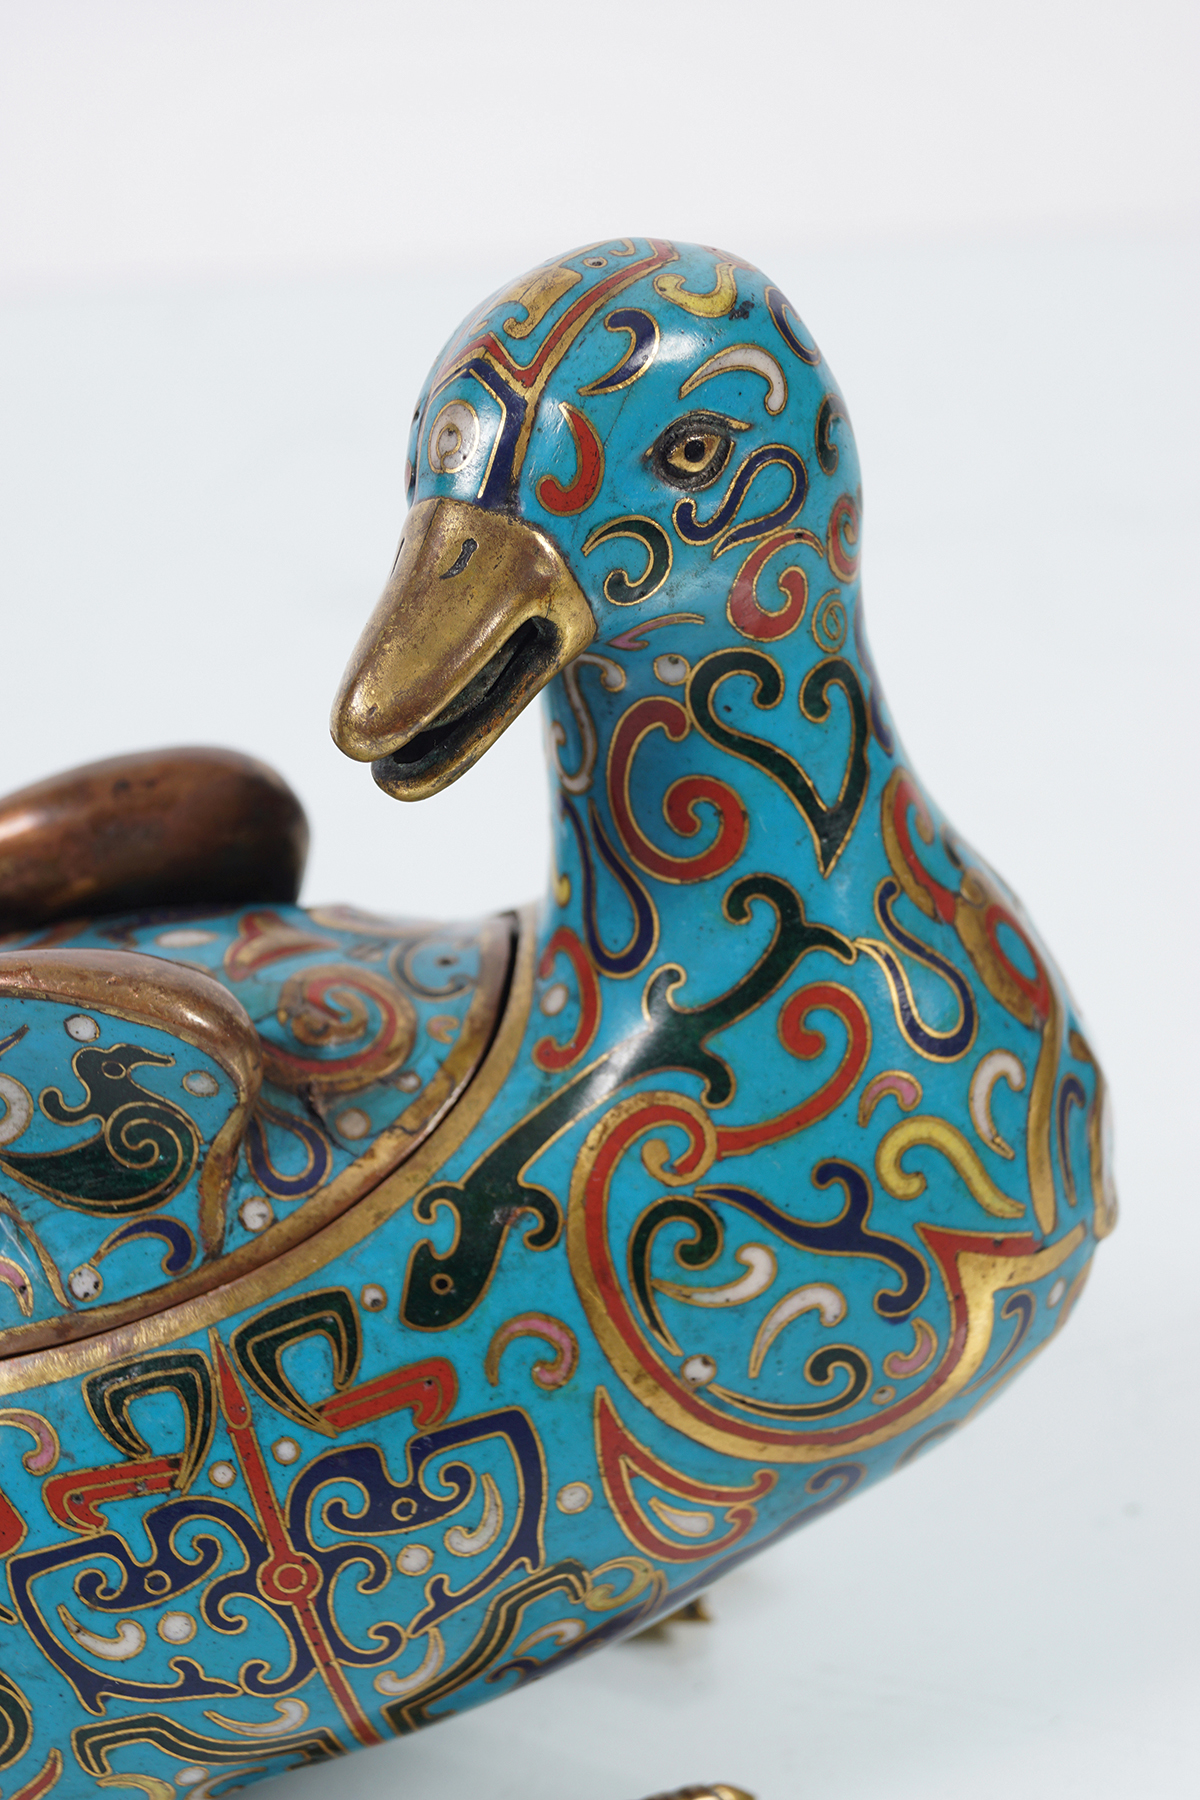 PAIR OF CHINESE QING CLOISONNÉ ENAMELLED DUCKS - Image 3 of 6